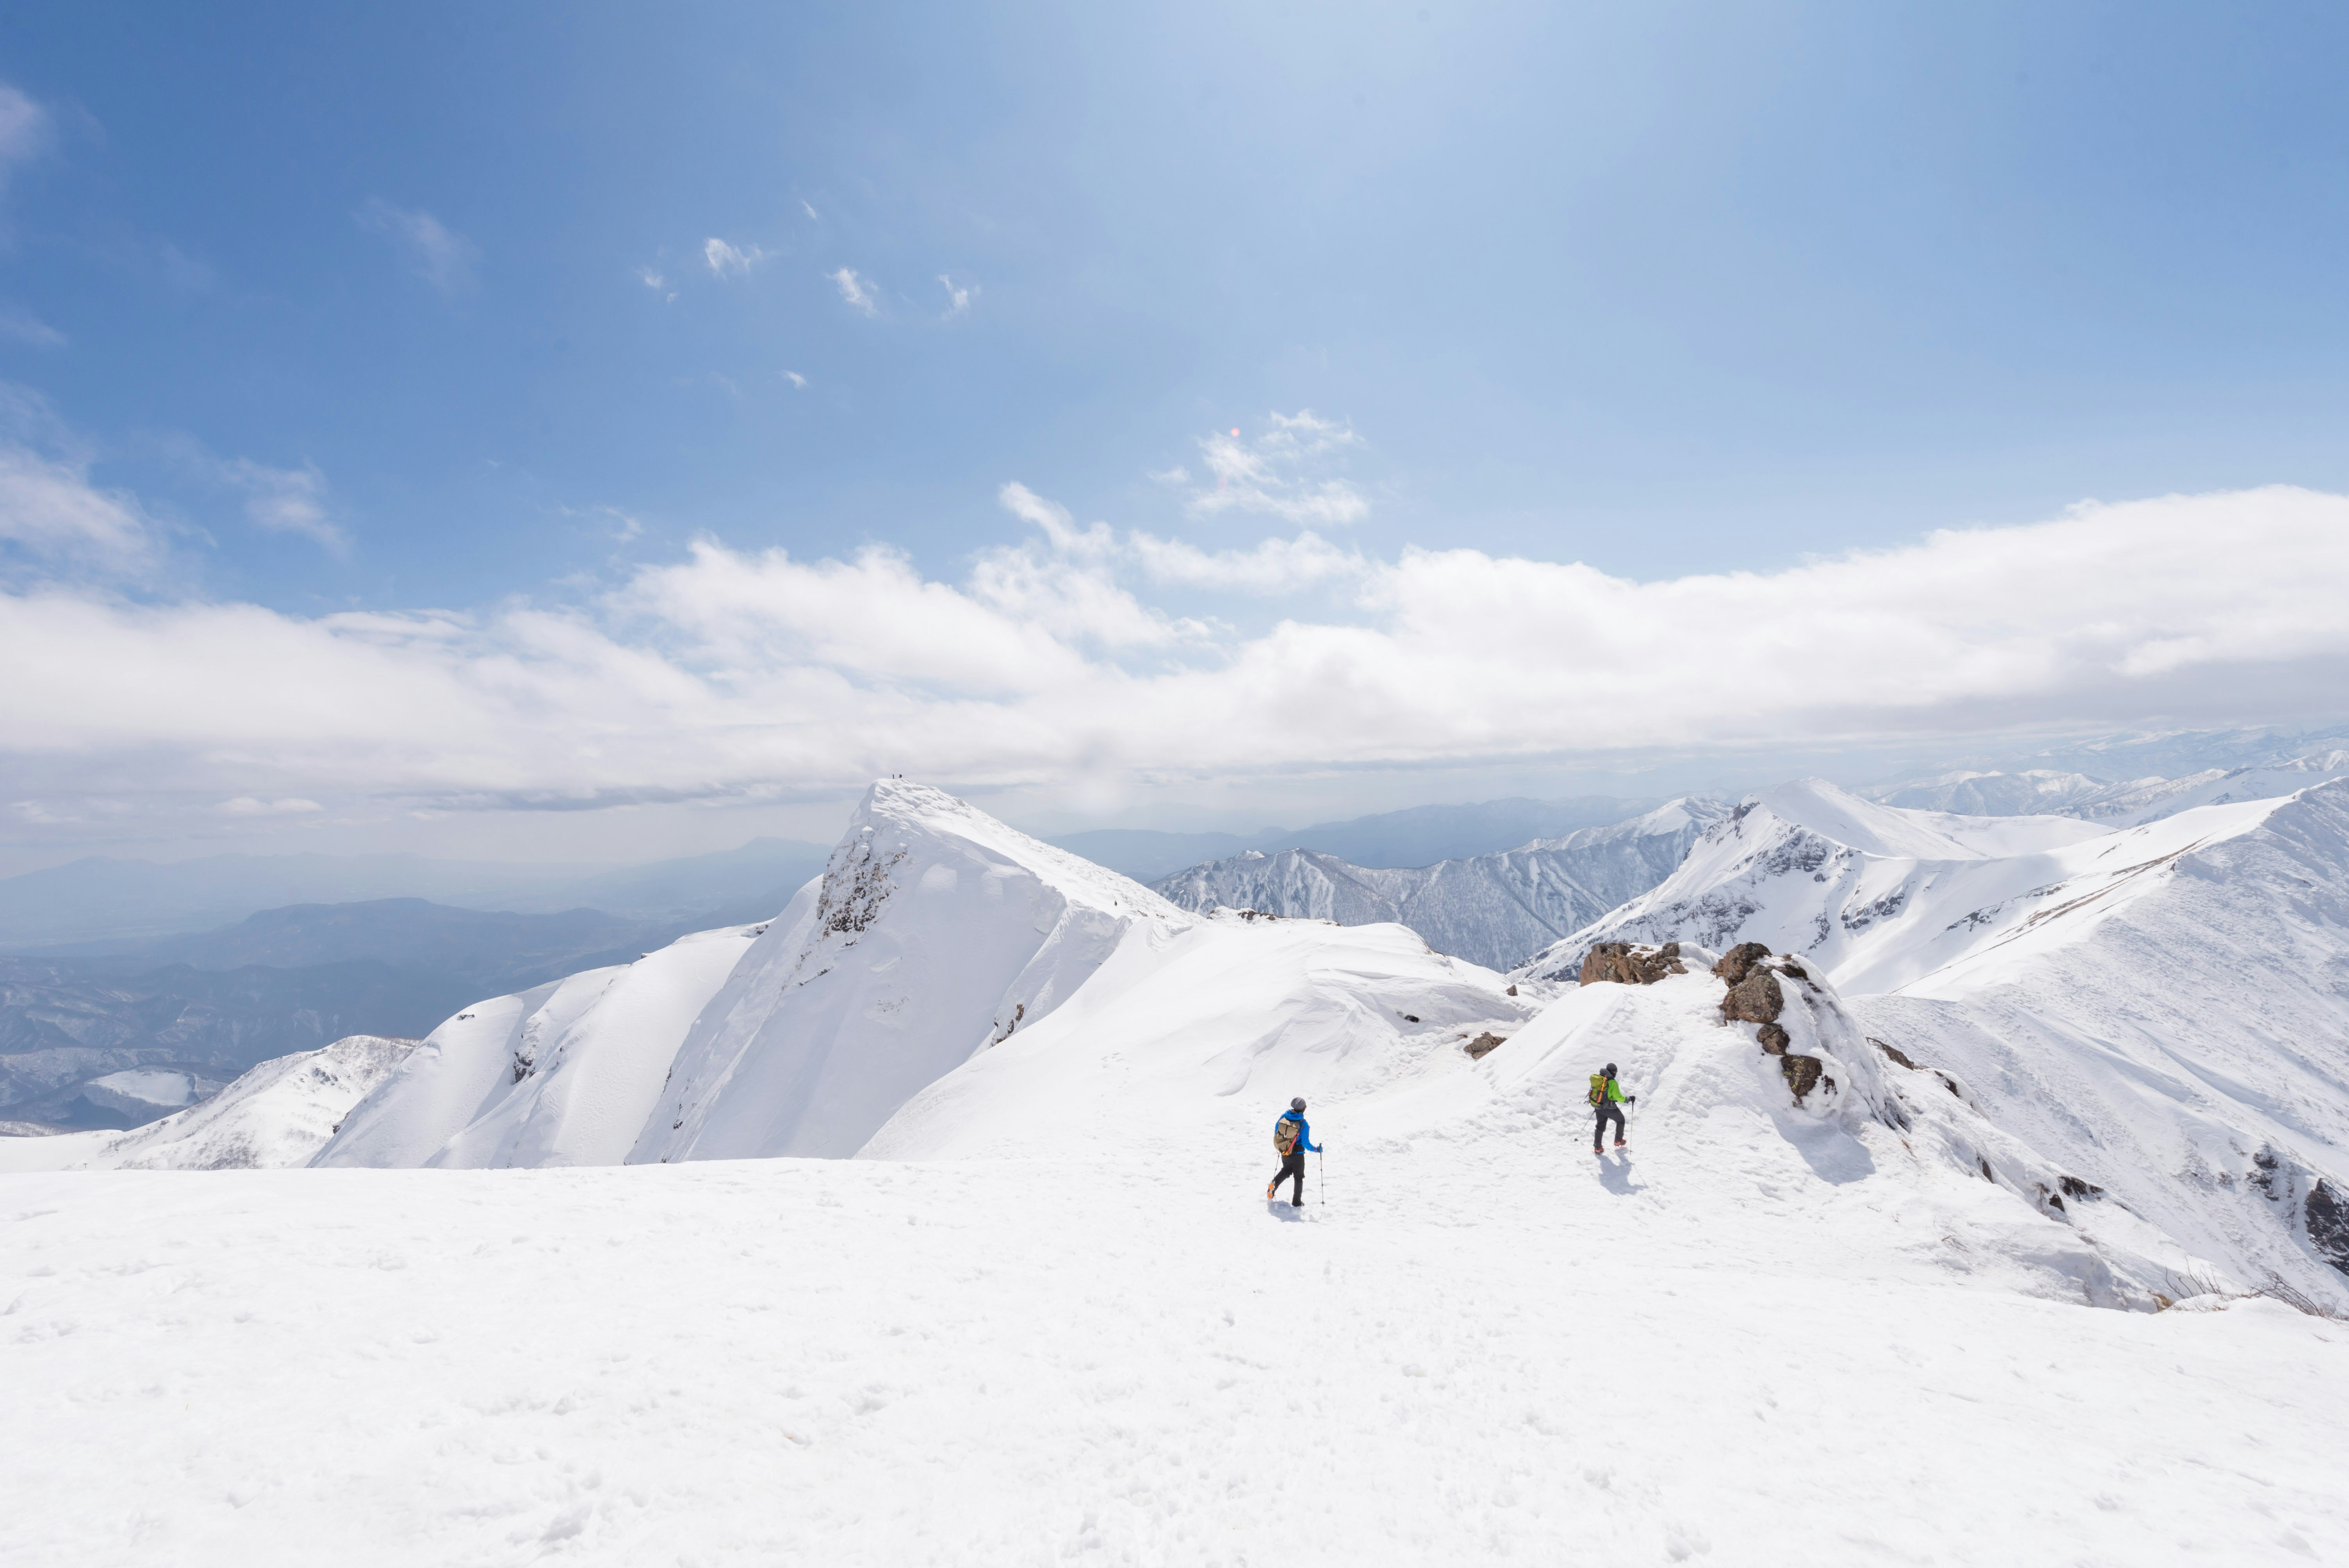 People look tiny against the huge expanse of a snow-covered mountain in Japan